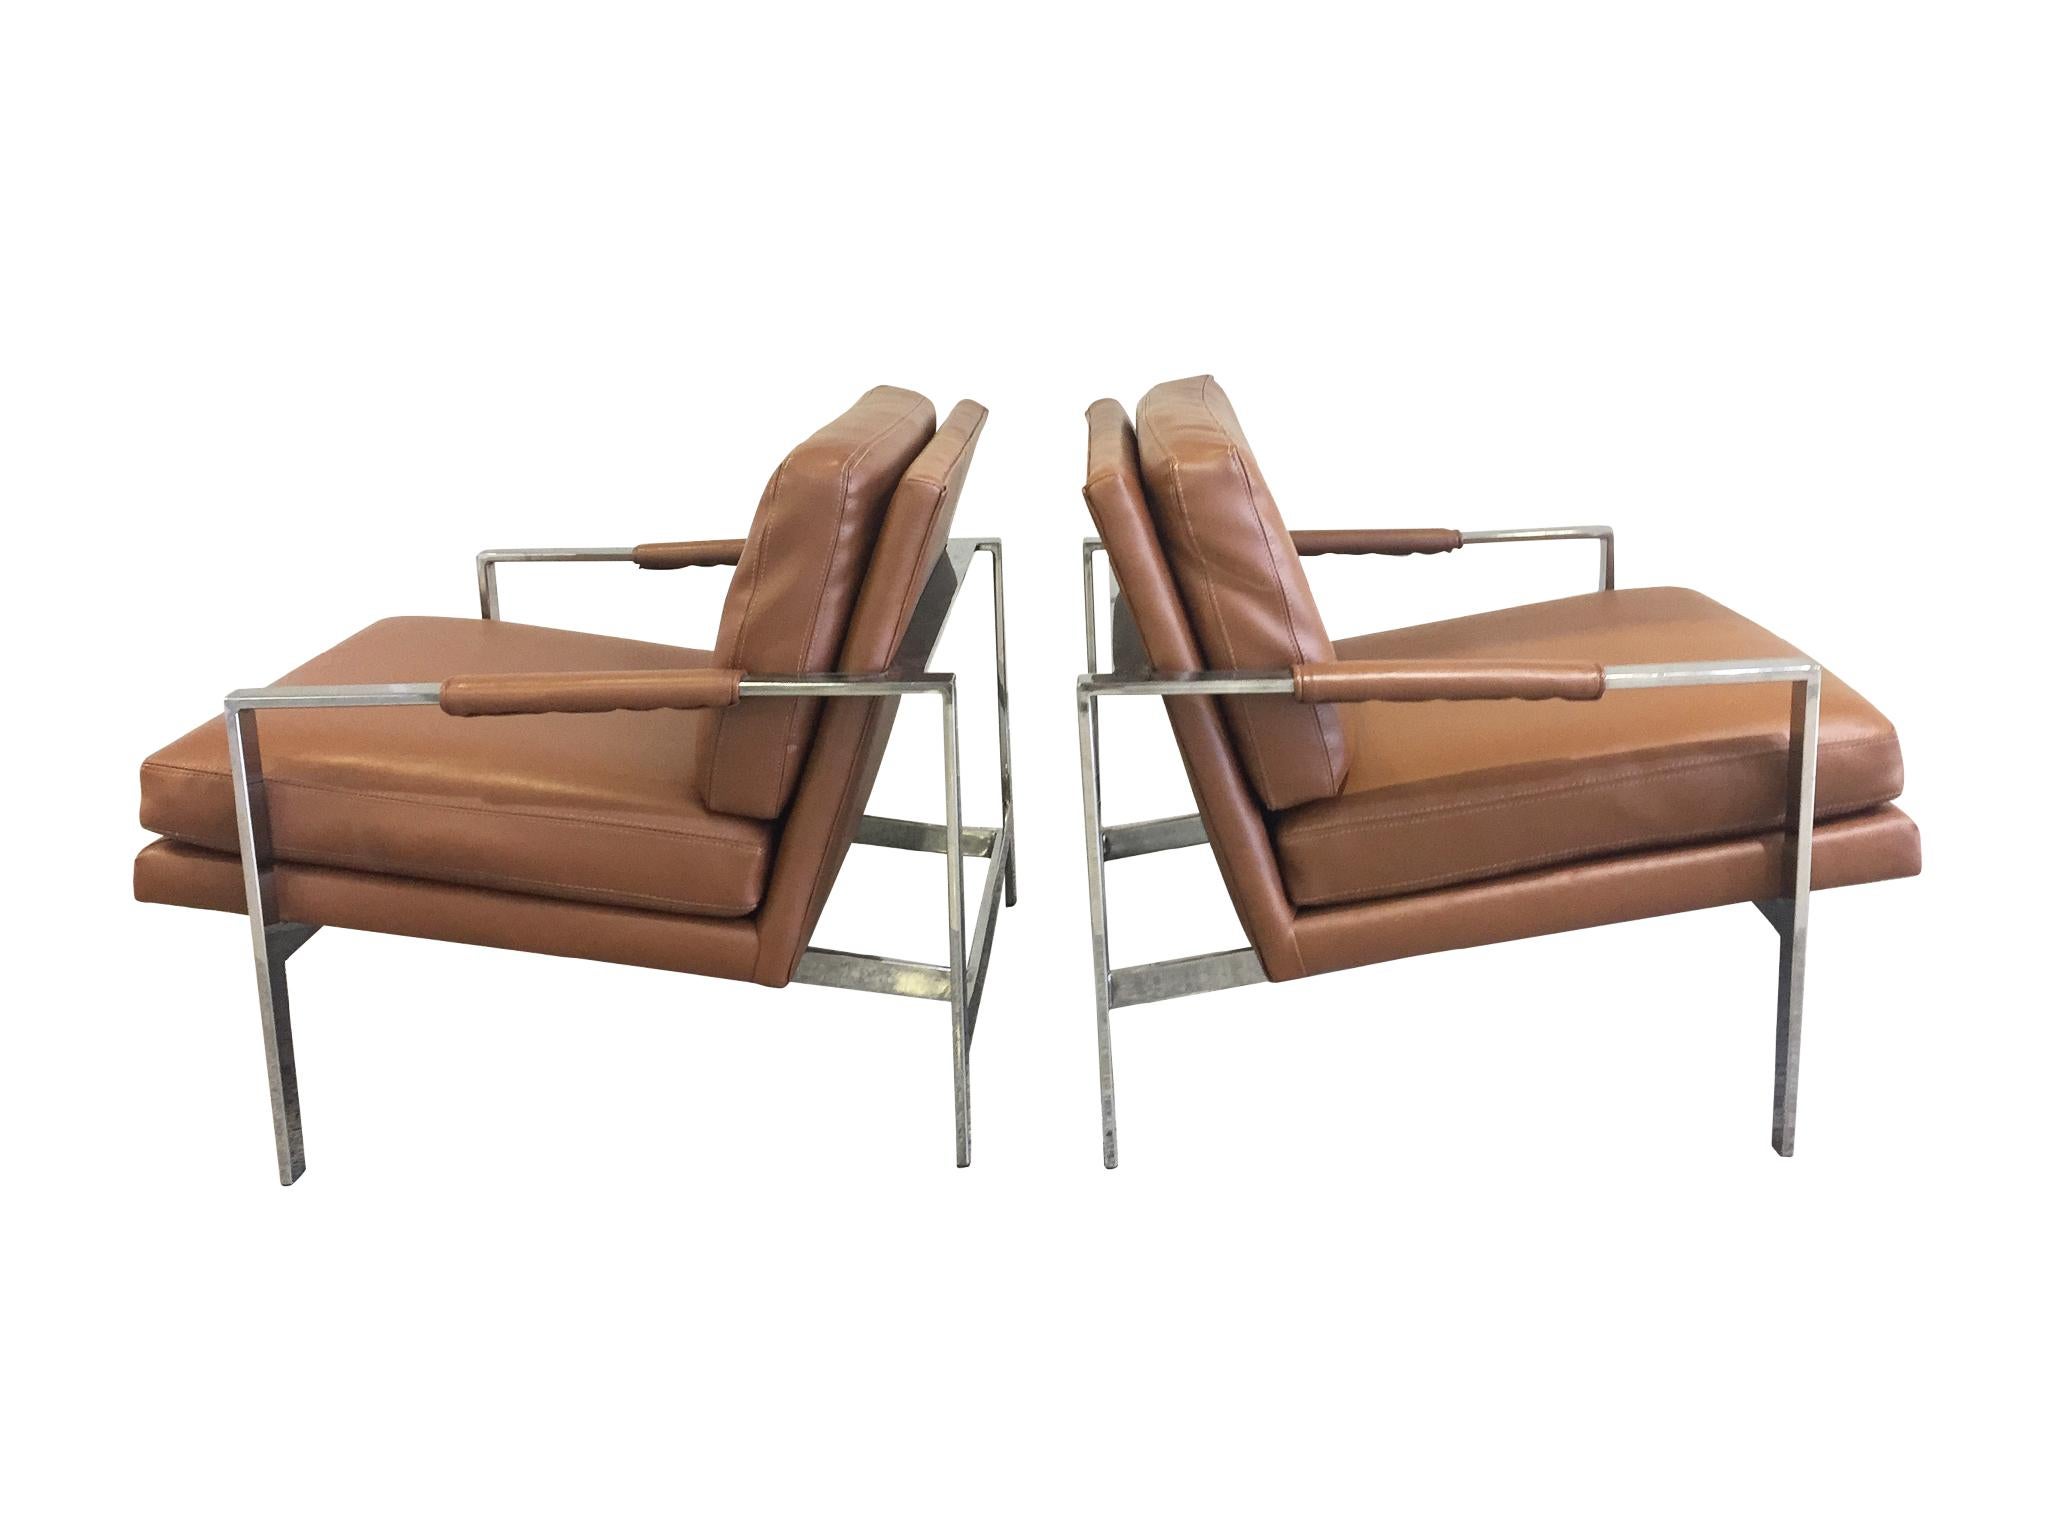 An exceptional pair of lounge chairs attributed to Milo Baughman, whose furniture are renowned for their simple, clean lines. Manufactured in the 1960s. These lounge chairs consist of a sturdy chrome frame with sleek lines & a warm caramel leather